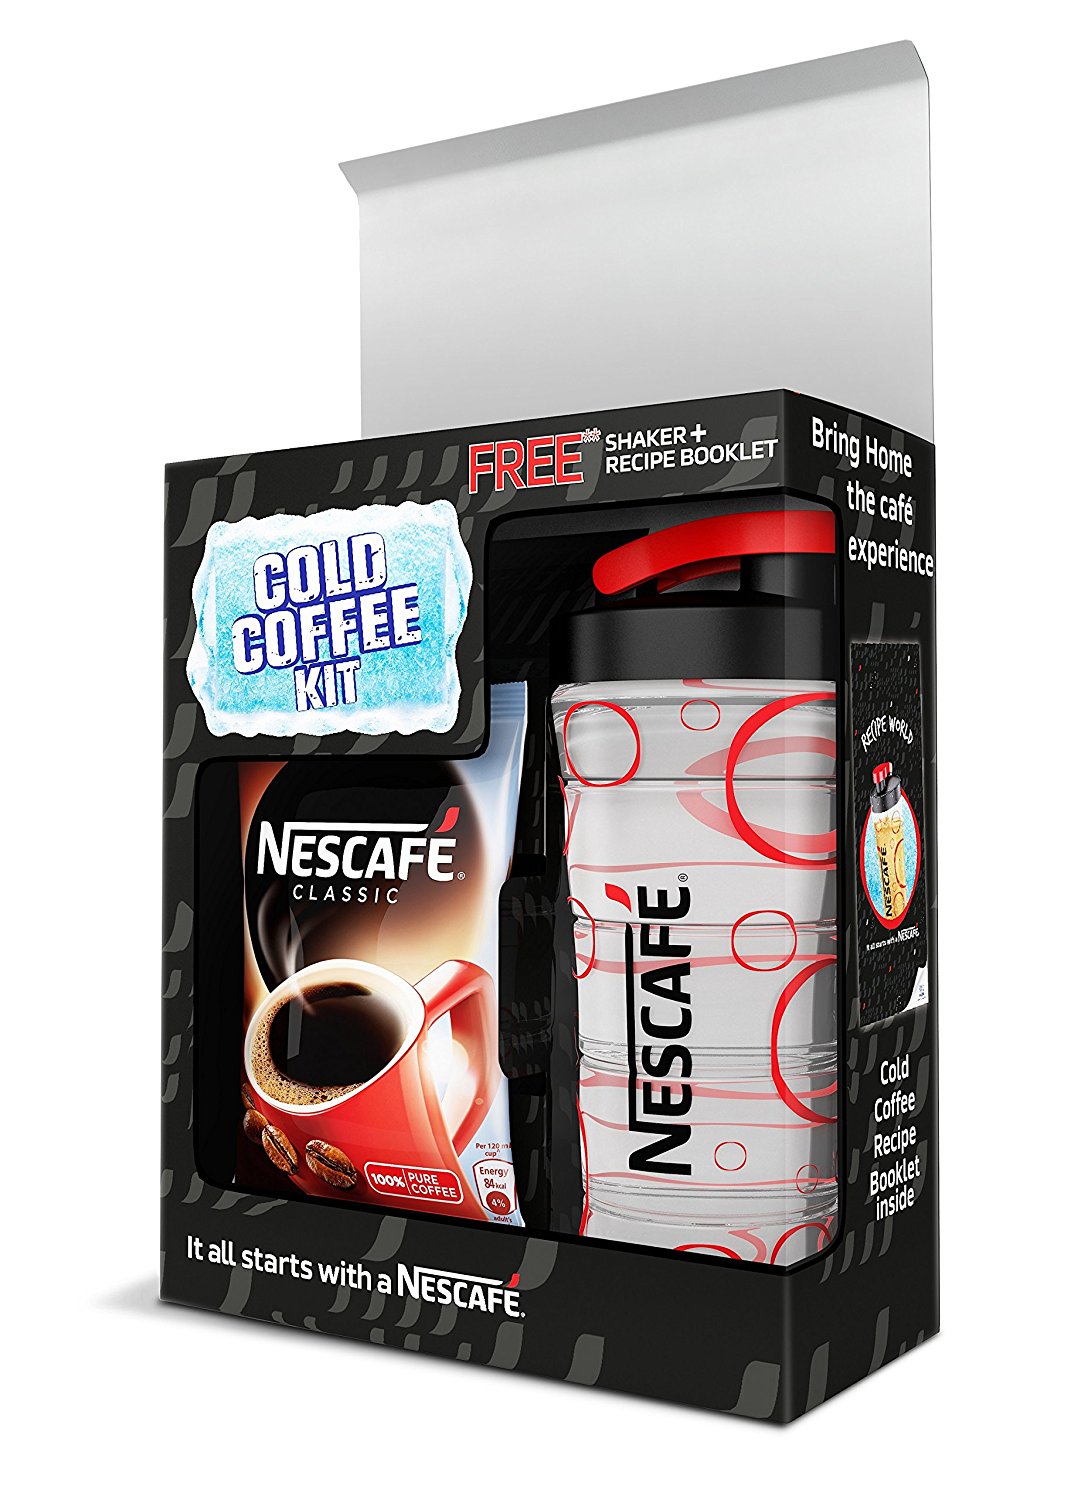 Nescafe Classic Coffee, 50g with Free Shaker and Cold Coffee Recipe Booklet